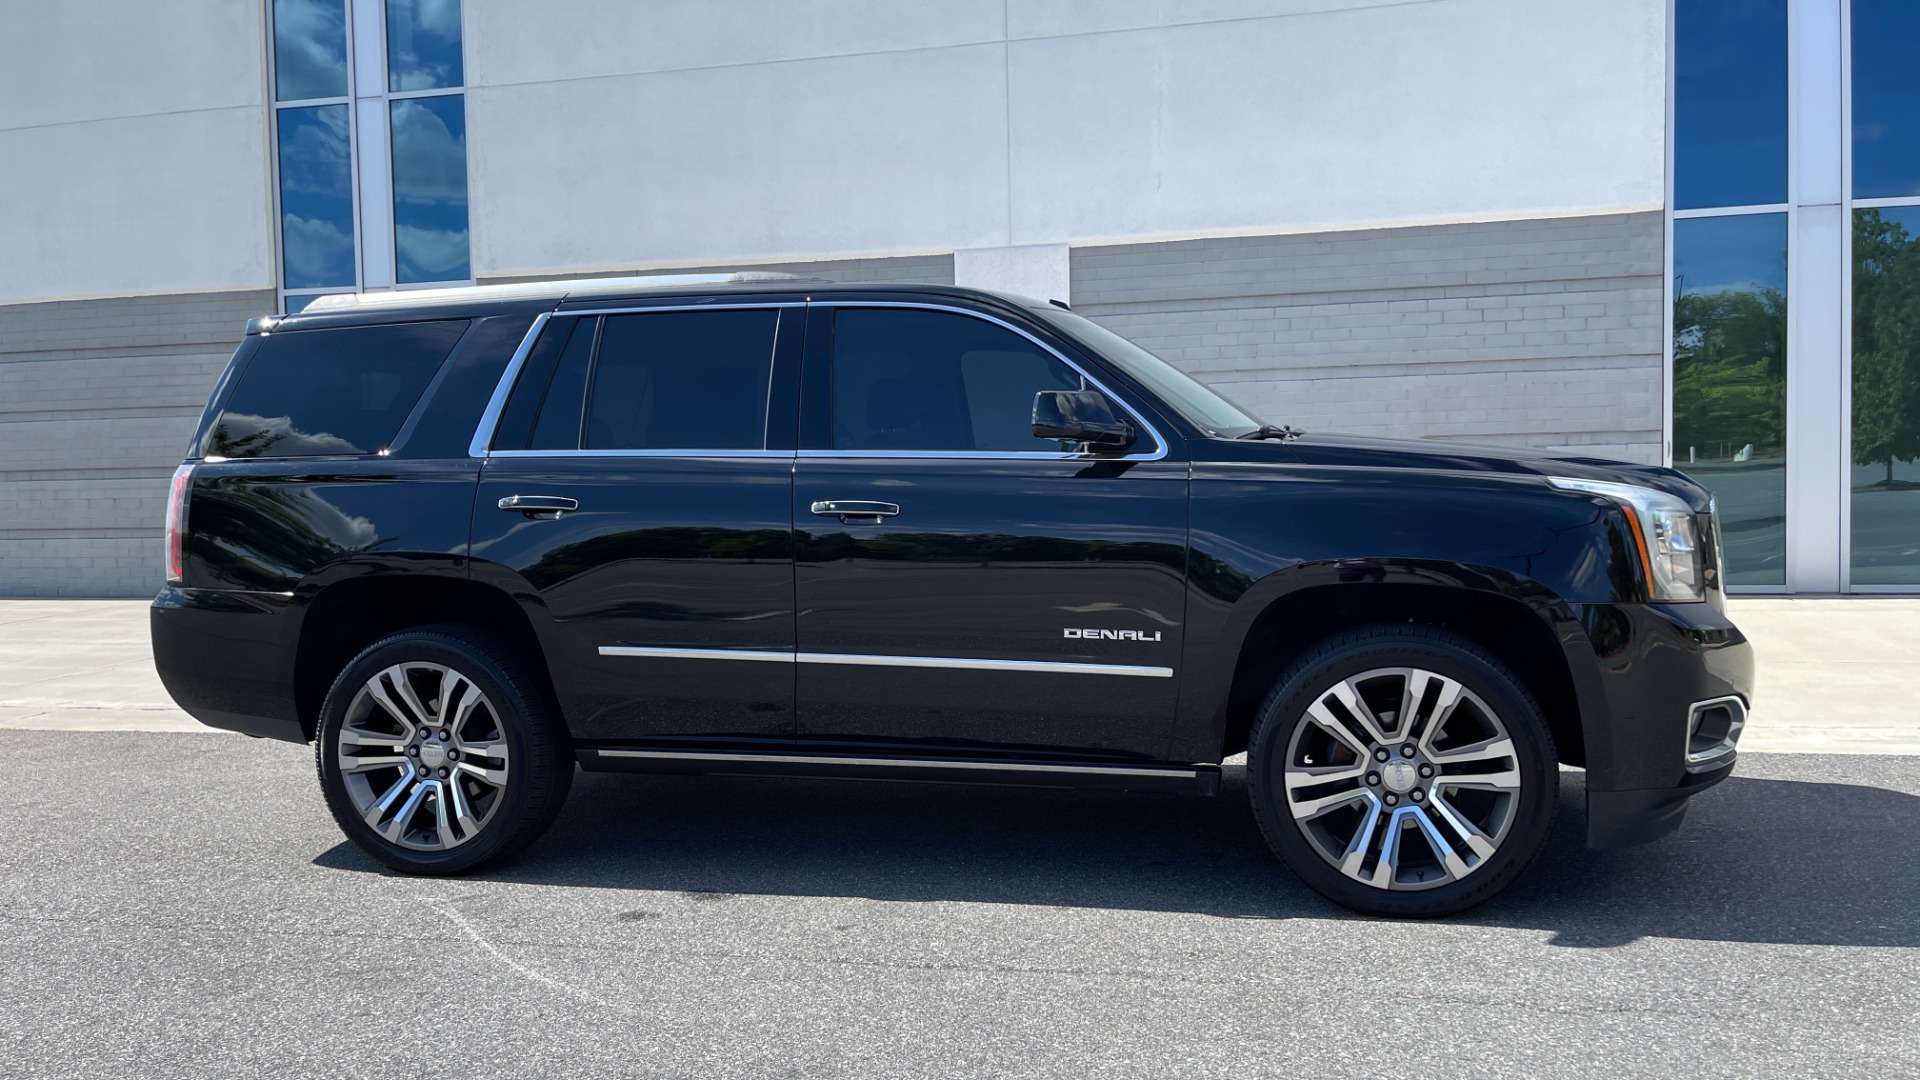 Used 2019 GMC Yukon DENALI / ULTIMATE PACKAGE / DVD / 4X4 / ADAPTIVE CRUISE / SUNROOF for sale $58,295 at Formula Imports in Charlotte NC 28227 3